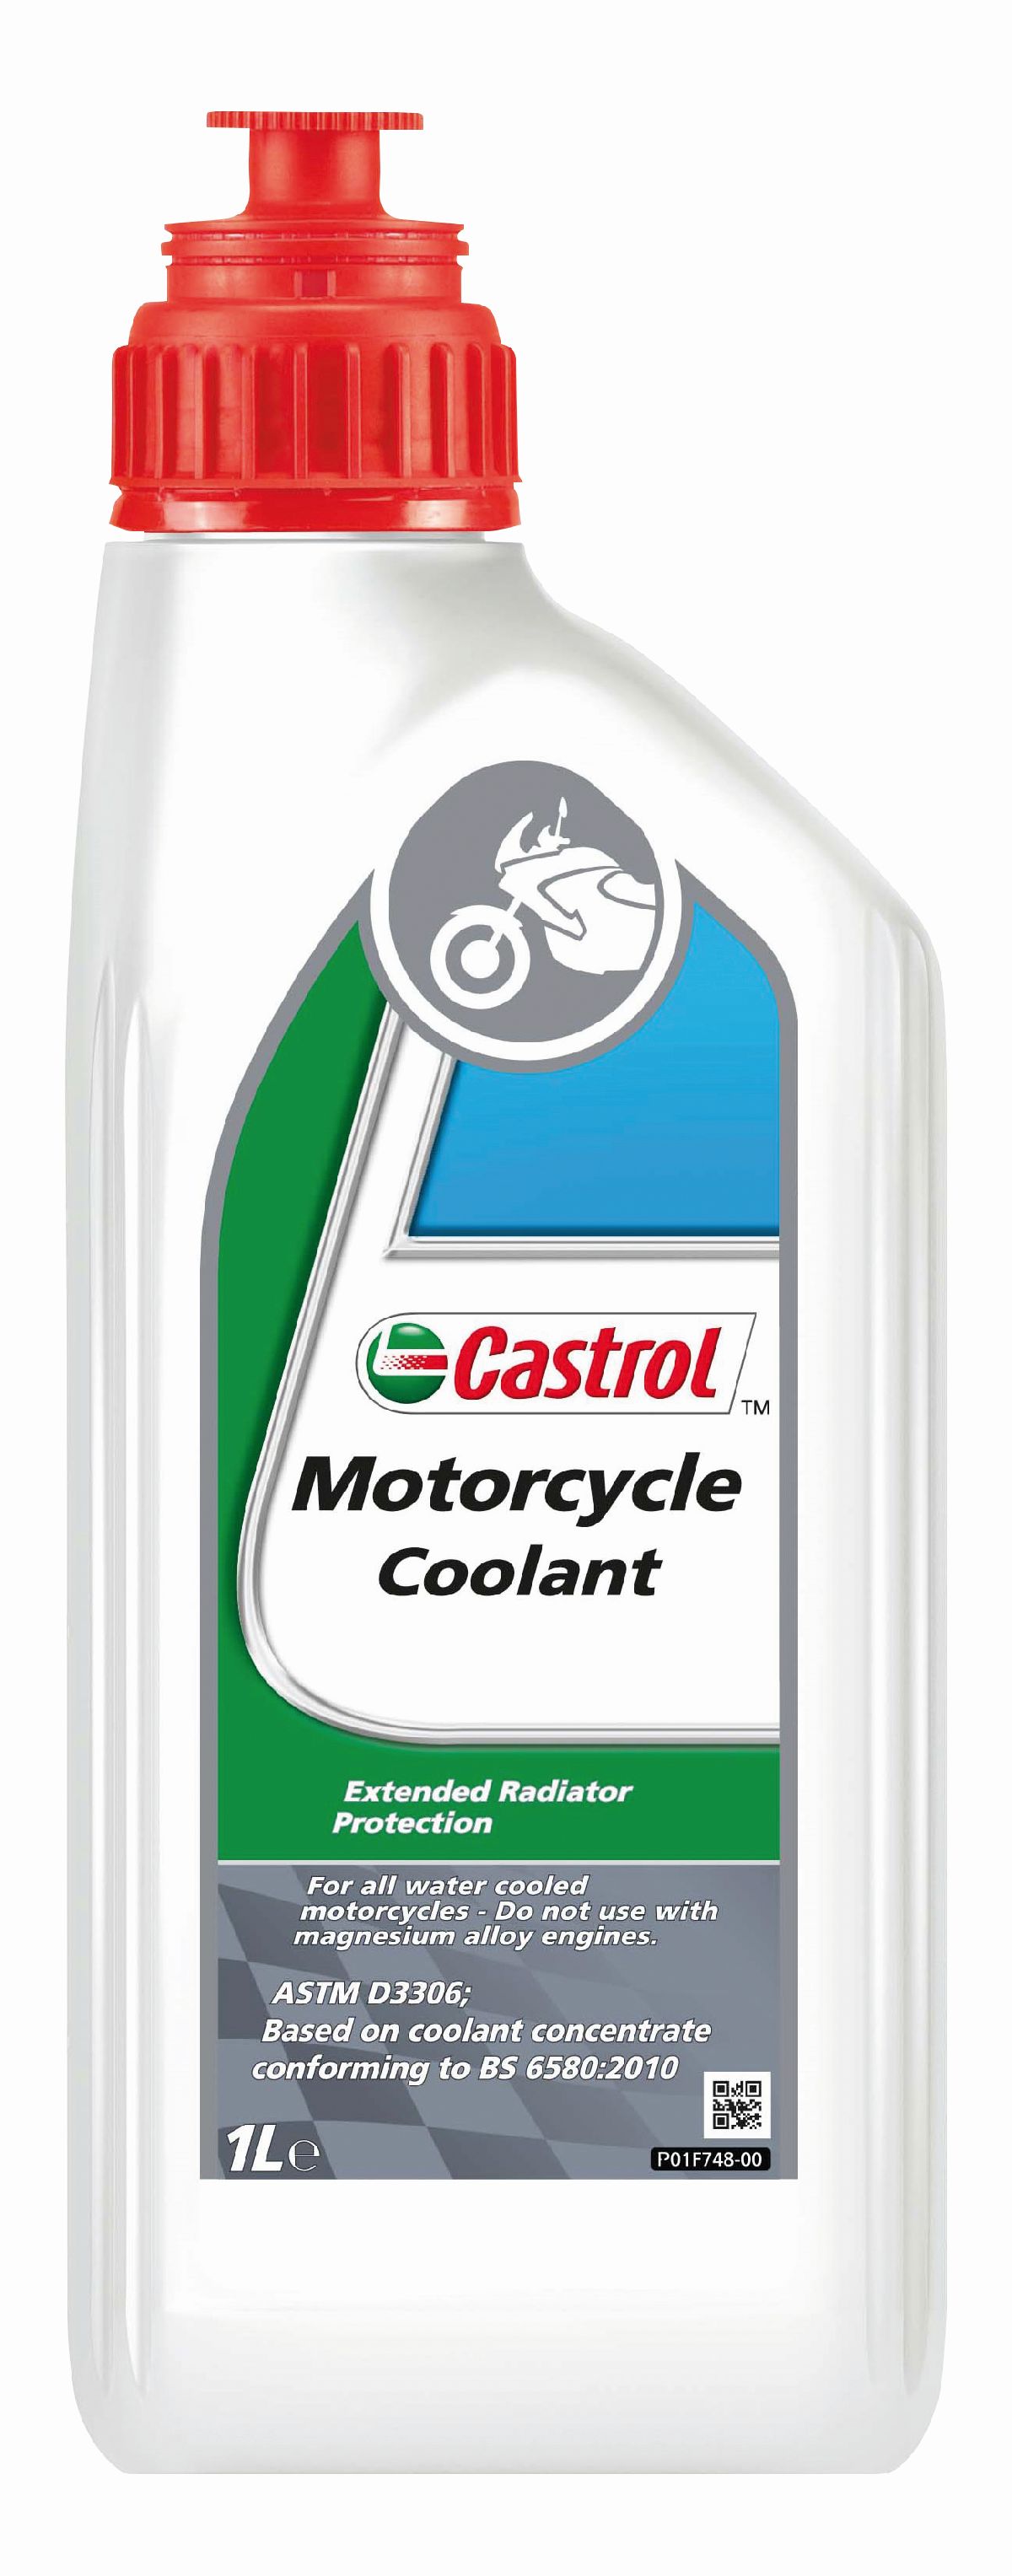 Motorcycle Coolant